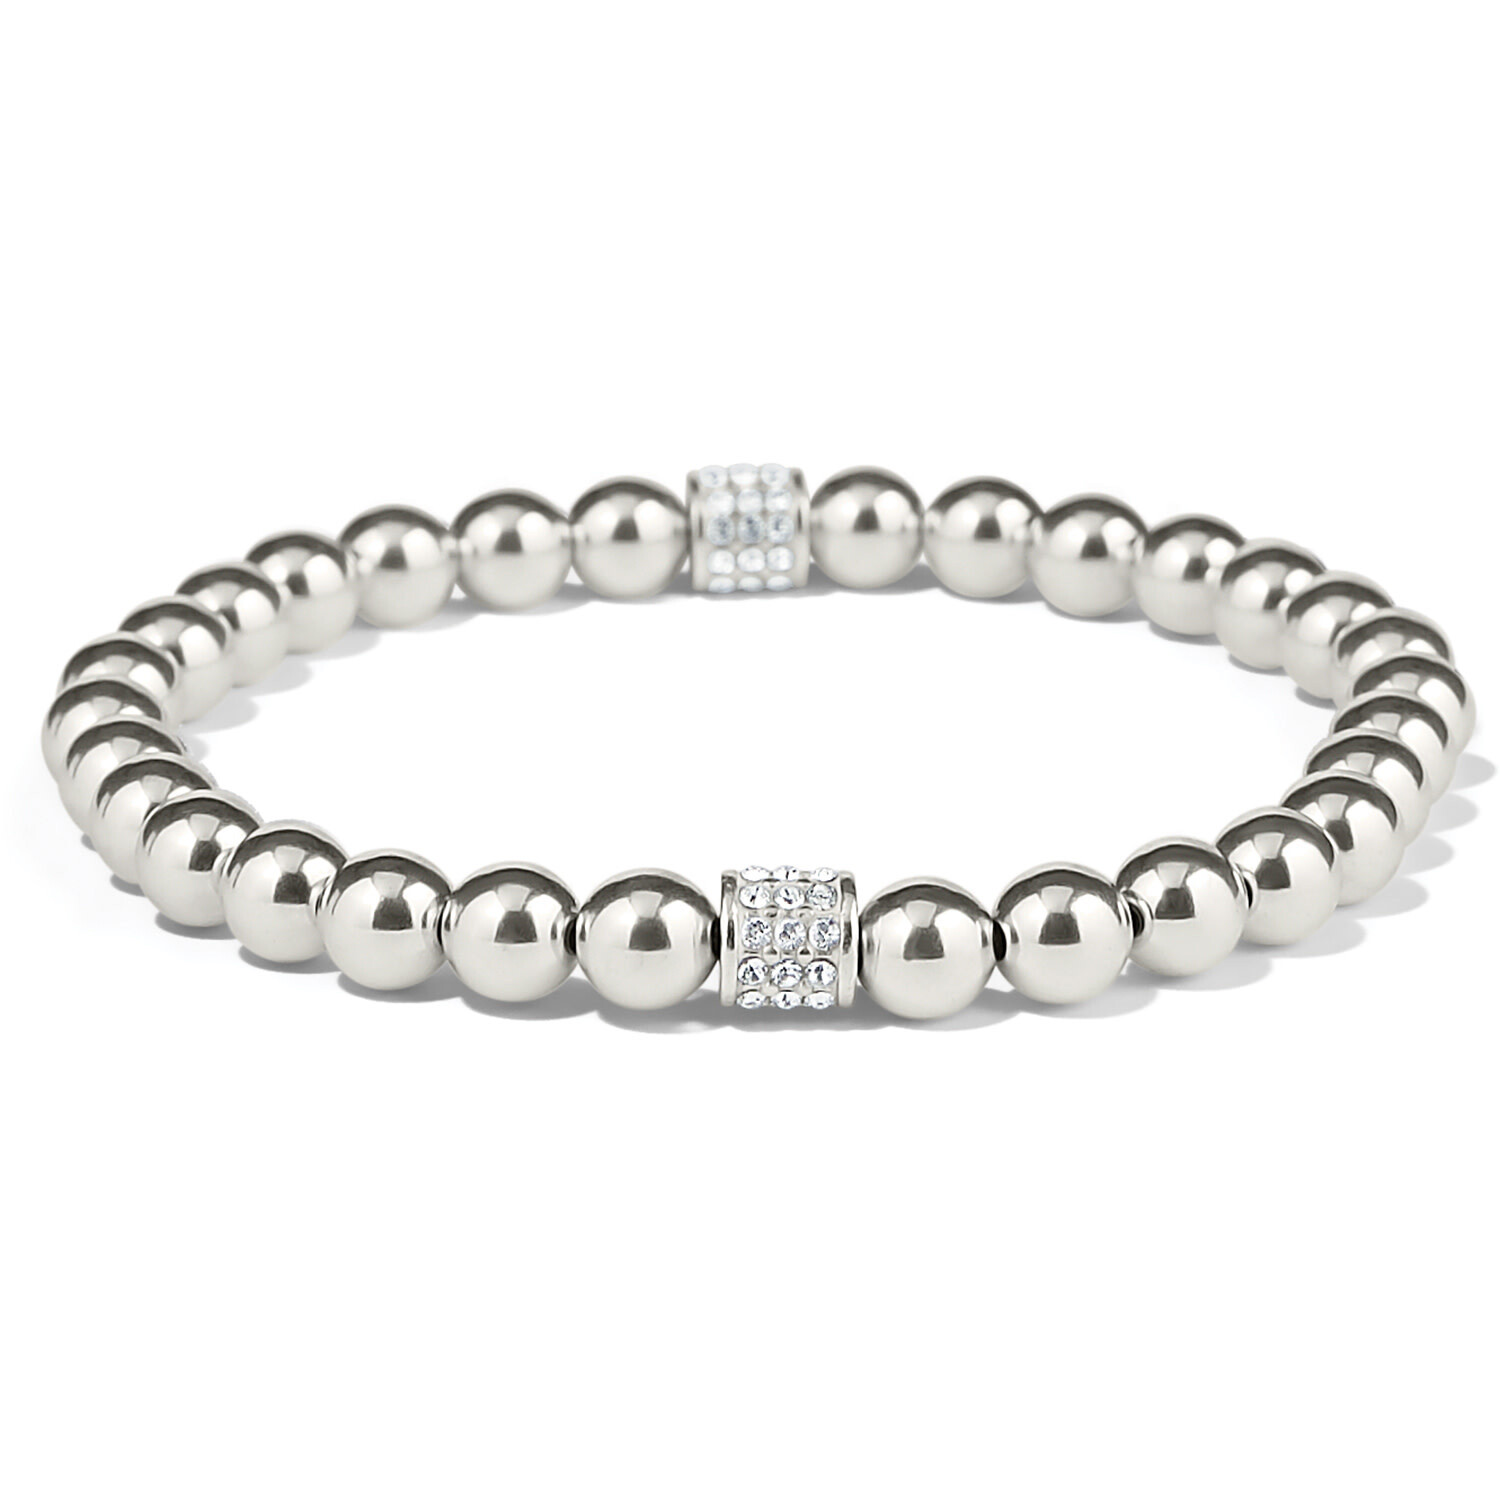 The Katie Sterling Silver Bead Bracelet Silver Bead Stretch